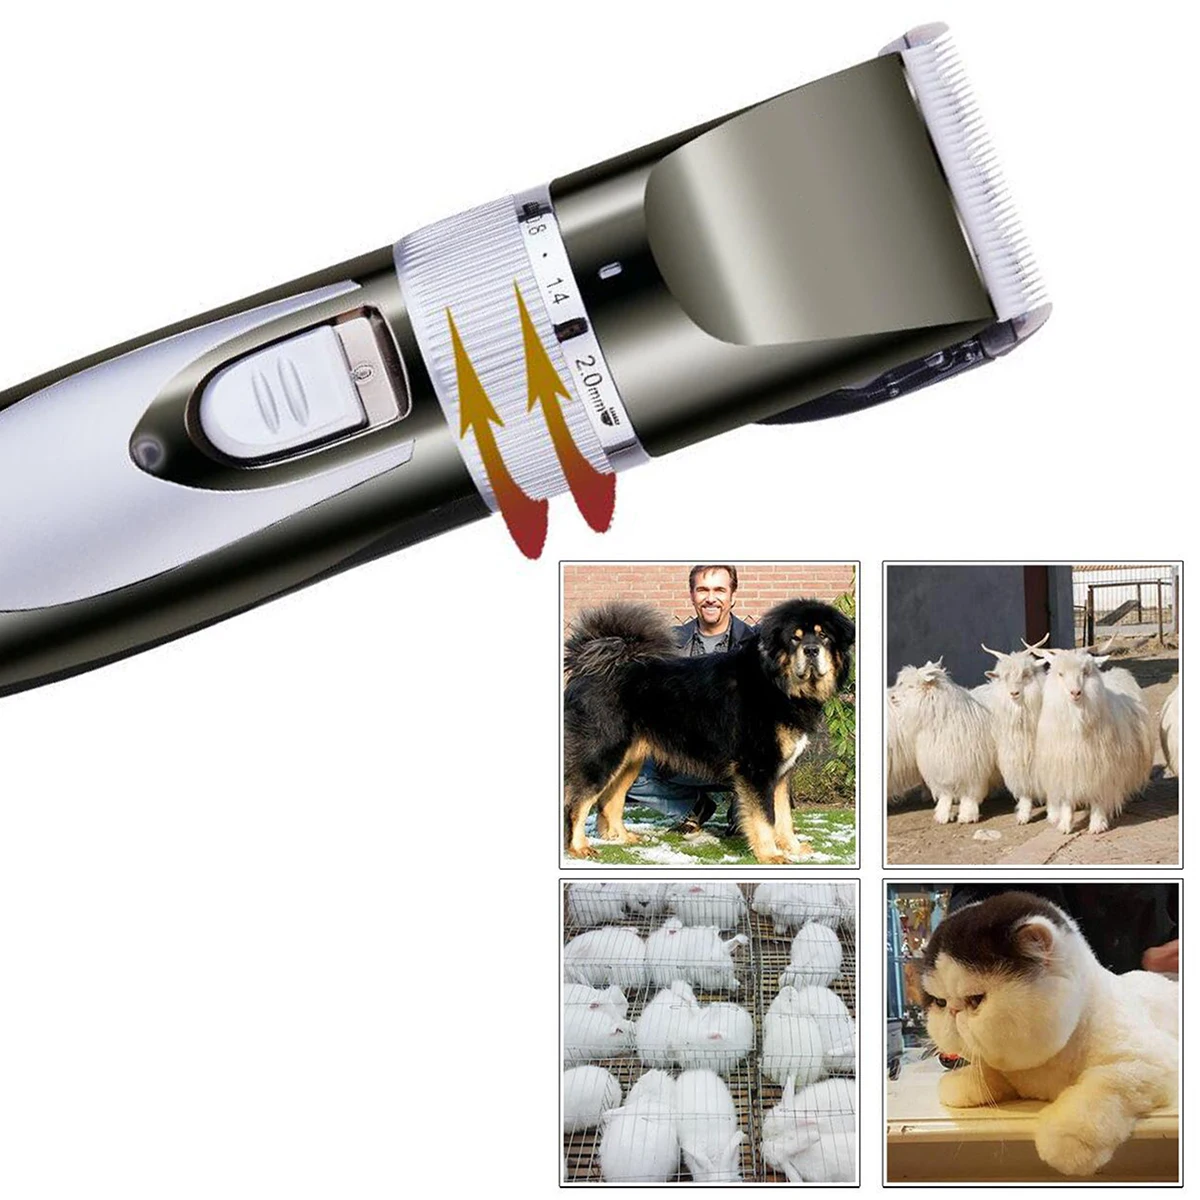 

Electric Pet Hair Trimmer Low Noise Pet Hair Clipper Cutting Machine Hair Trimmers for Dogs Cats Rabbits Sheep US Plug